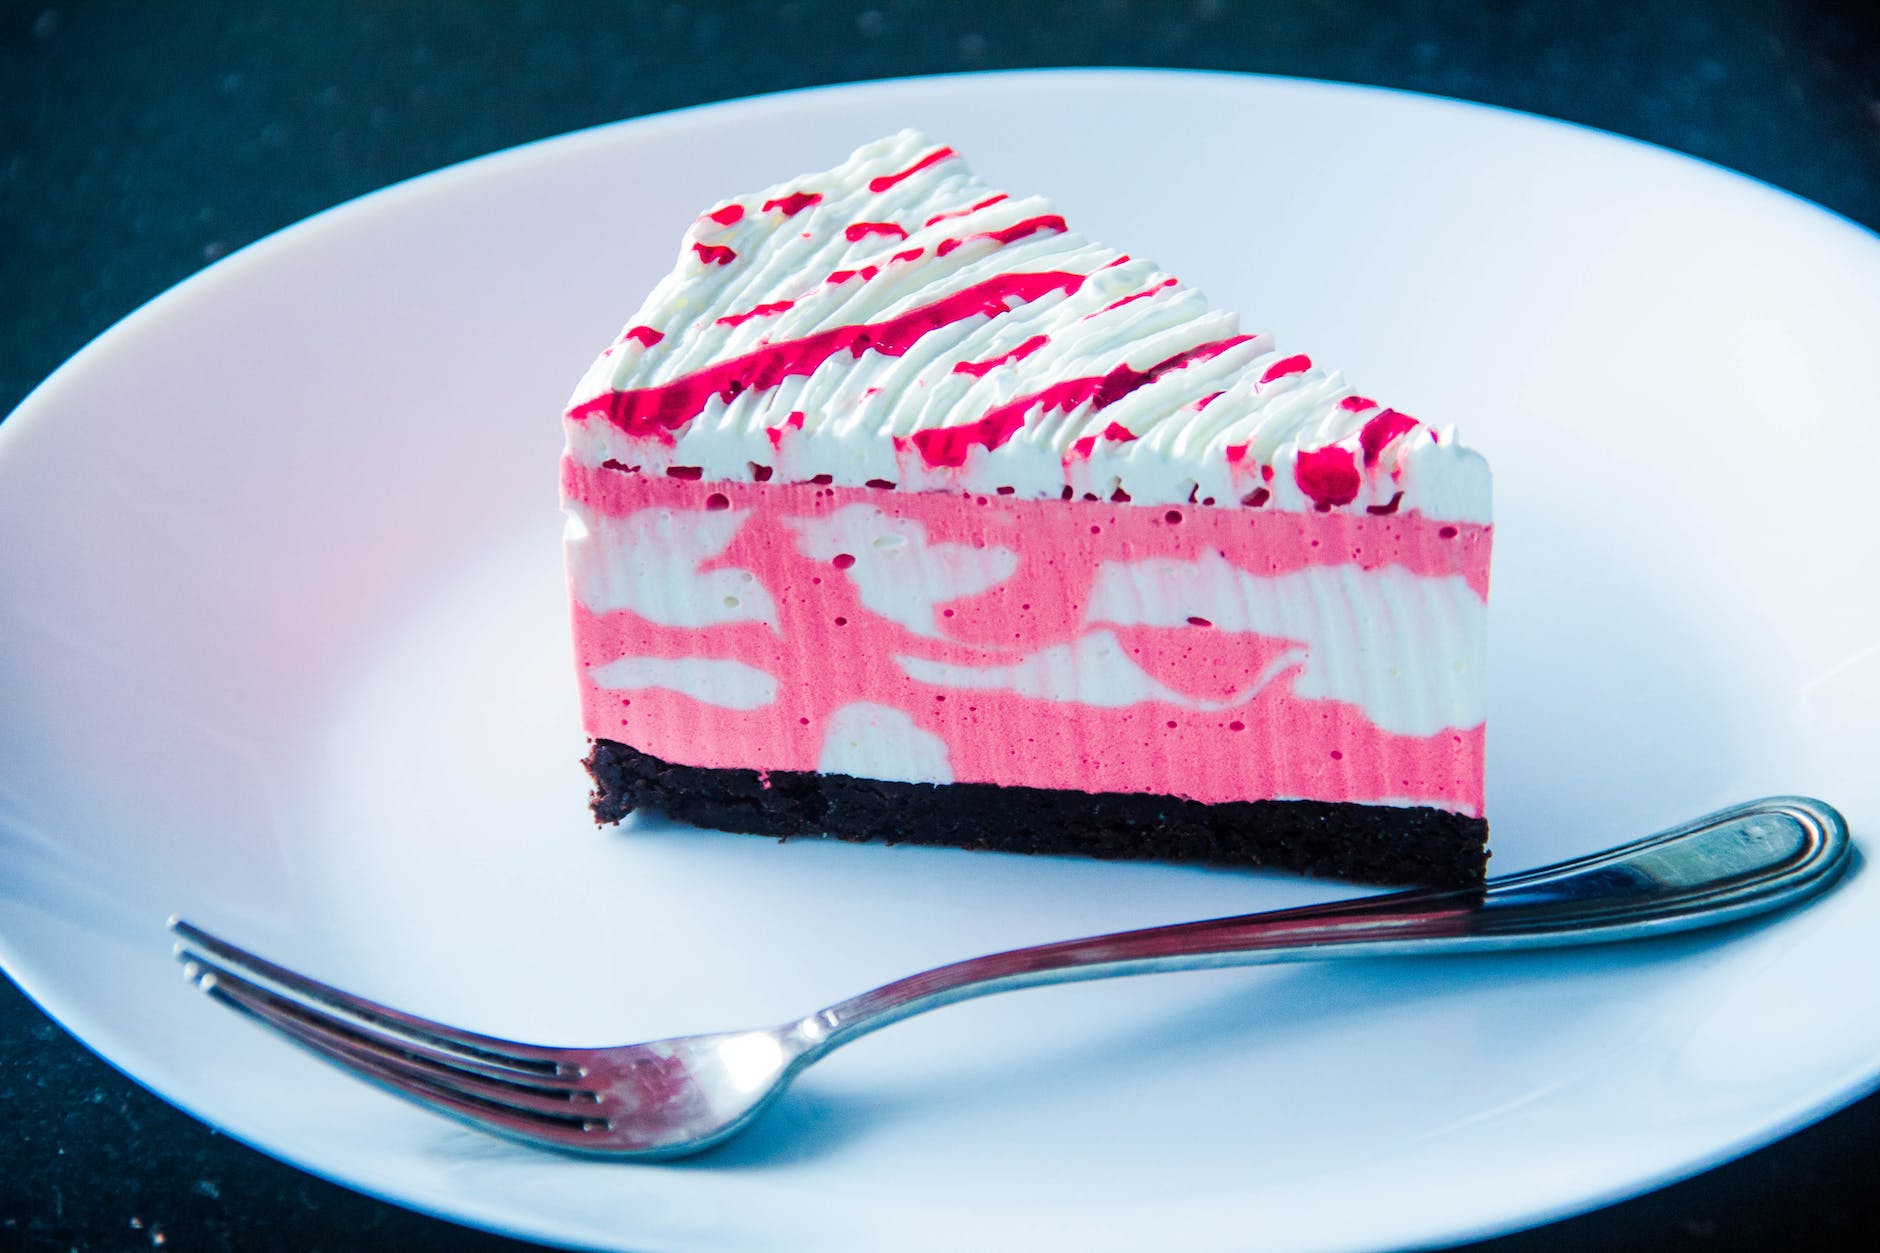 sliced white and pink icing covered cake on white plate with silver colored fork